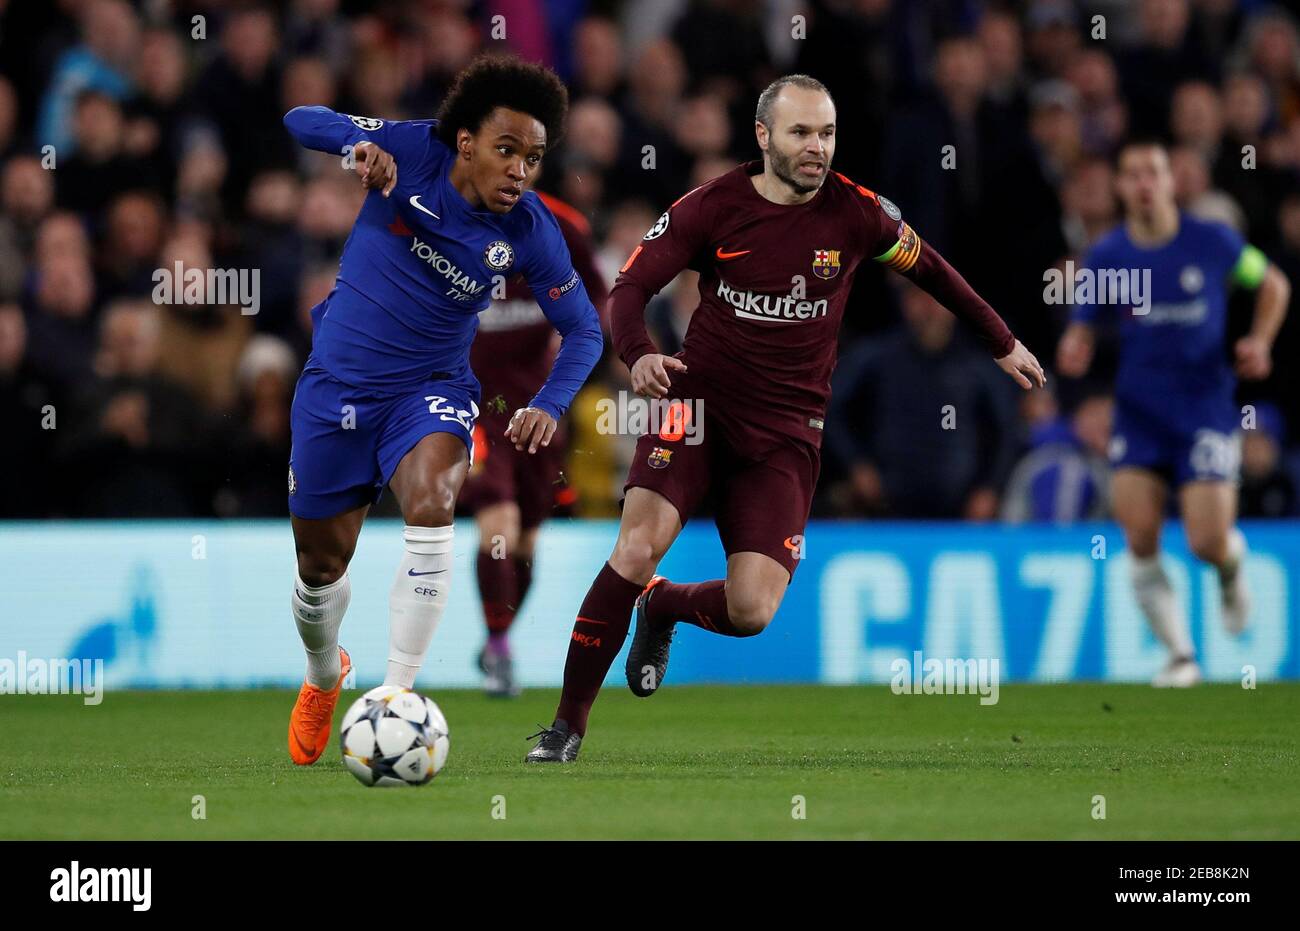 Soccer Football - Champions League Round of 16 First Leg - Chelsea vs FC Barcelona - Stamford Bridge, London, Britain - February 20, 2018   Chelsea's Willian in action with Barcelona’s Andres Iniesta     REUTERS/Eddie Keogh Stock Photo